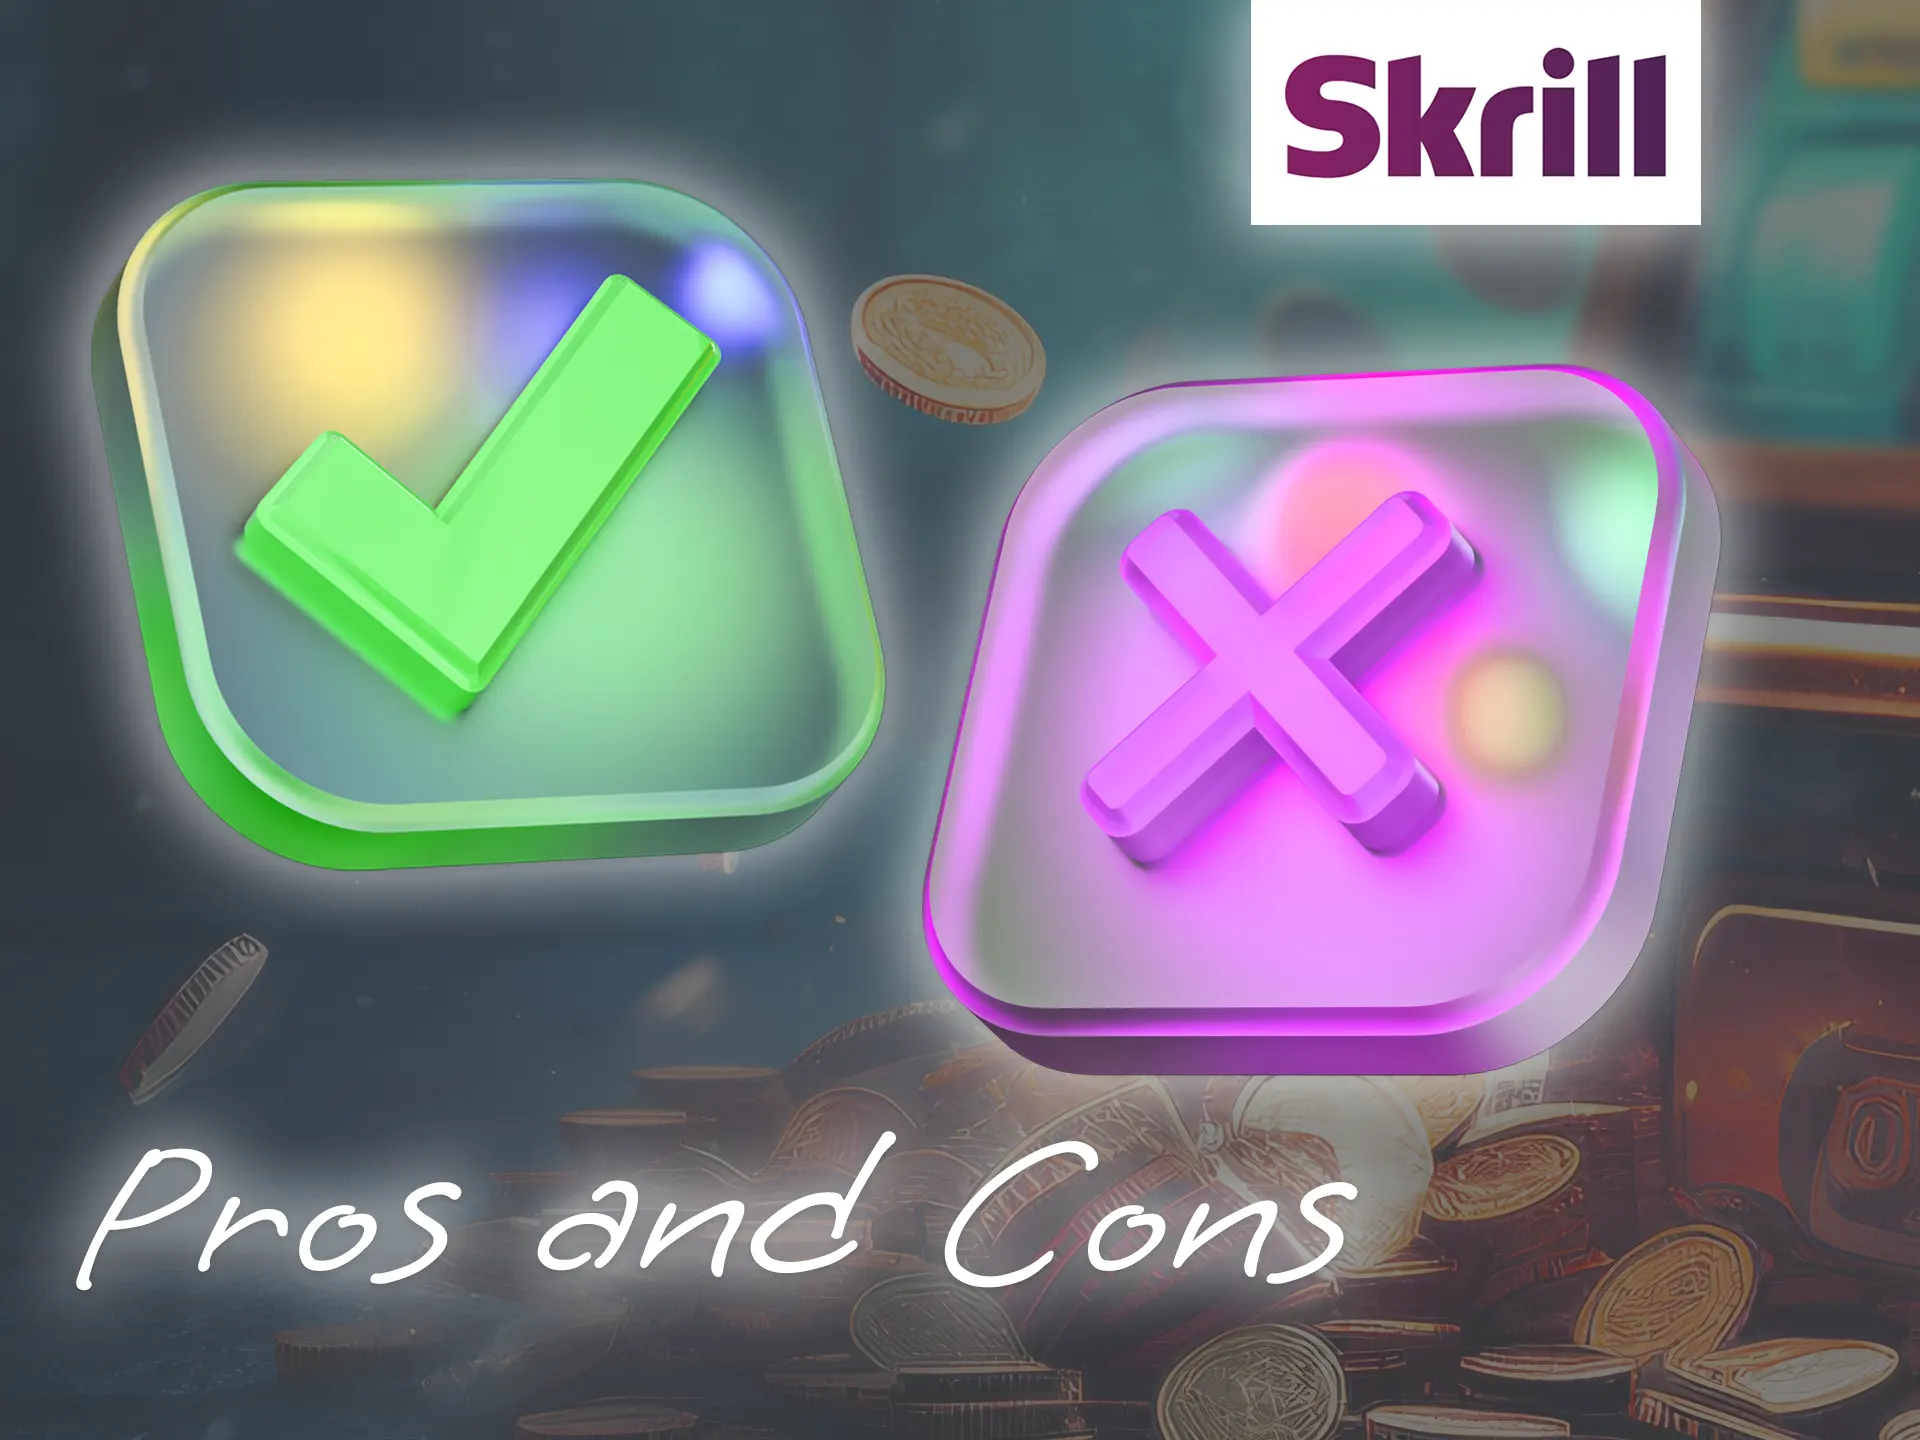 Familiarise yourself with the main pros and cons of Skrill.